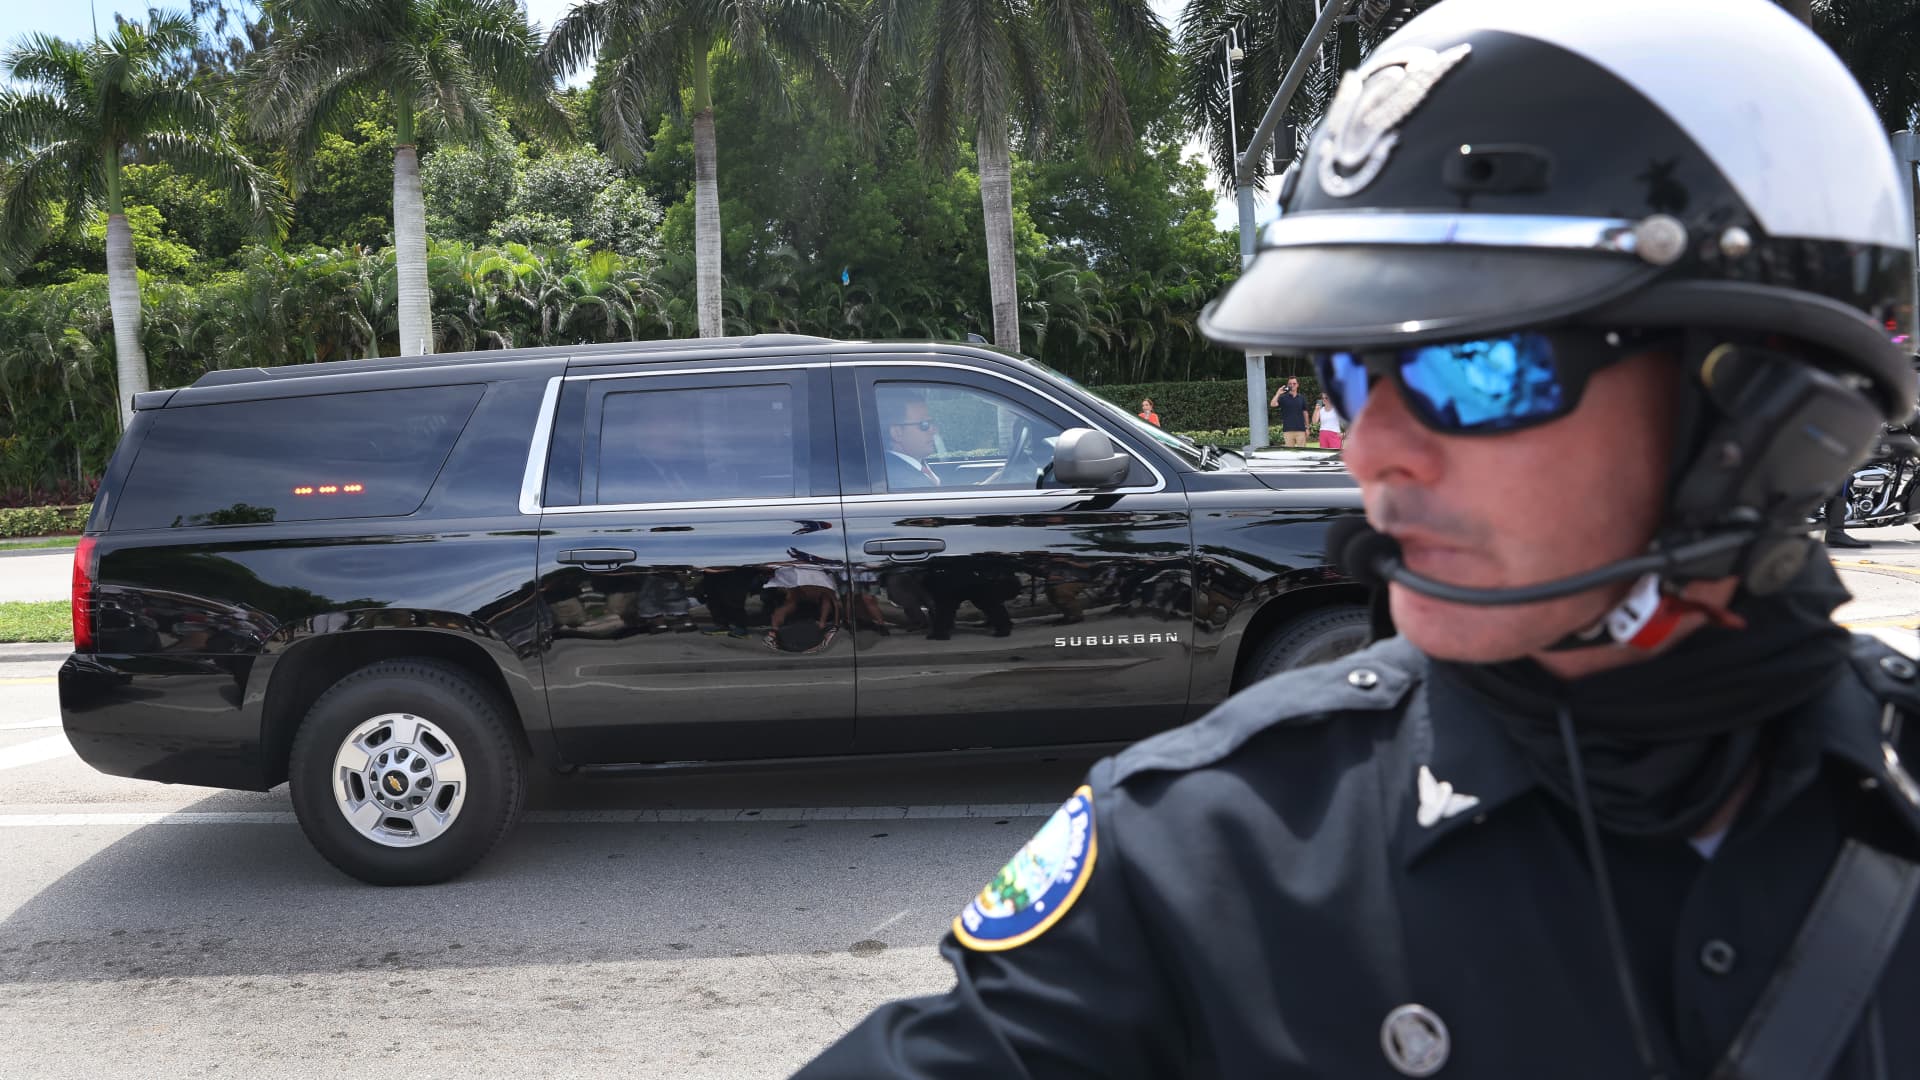 DORAL, FLORIDA - JUNE 12: A motorcade carrying former President Donald Trump arrives at the Trump National Doral Miami resort on June 12, 2023 in Doral, Florida. Trump is scheduled to appear tomorrow in federal court in Miami for an arraignment on charges including mishandling of classified documents, obstruction, and making false statements.(Photo by Scott Olson/Getty Images)